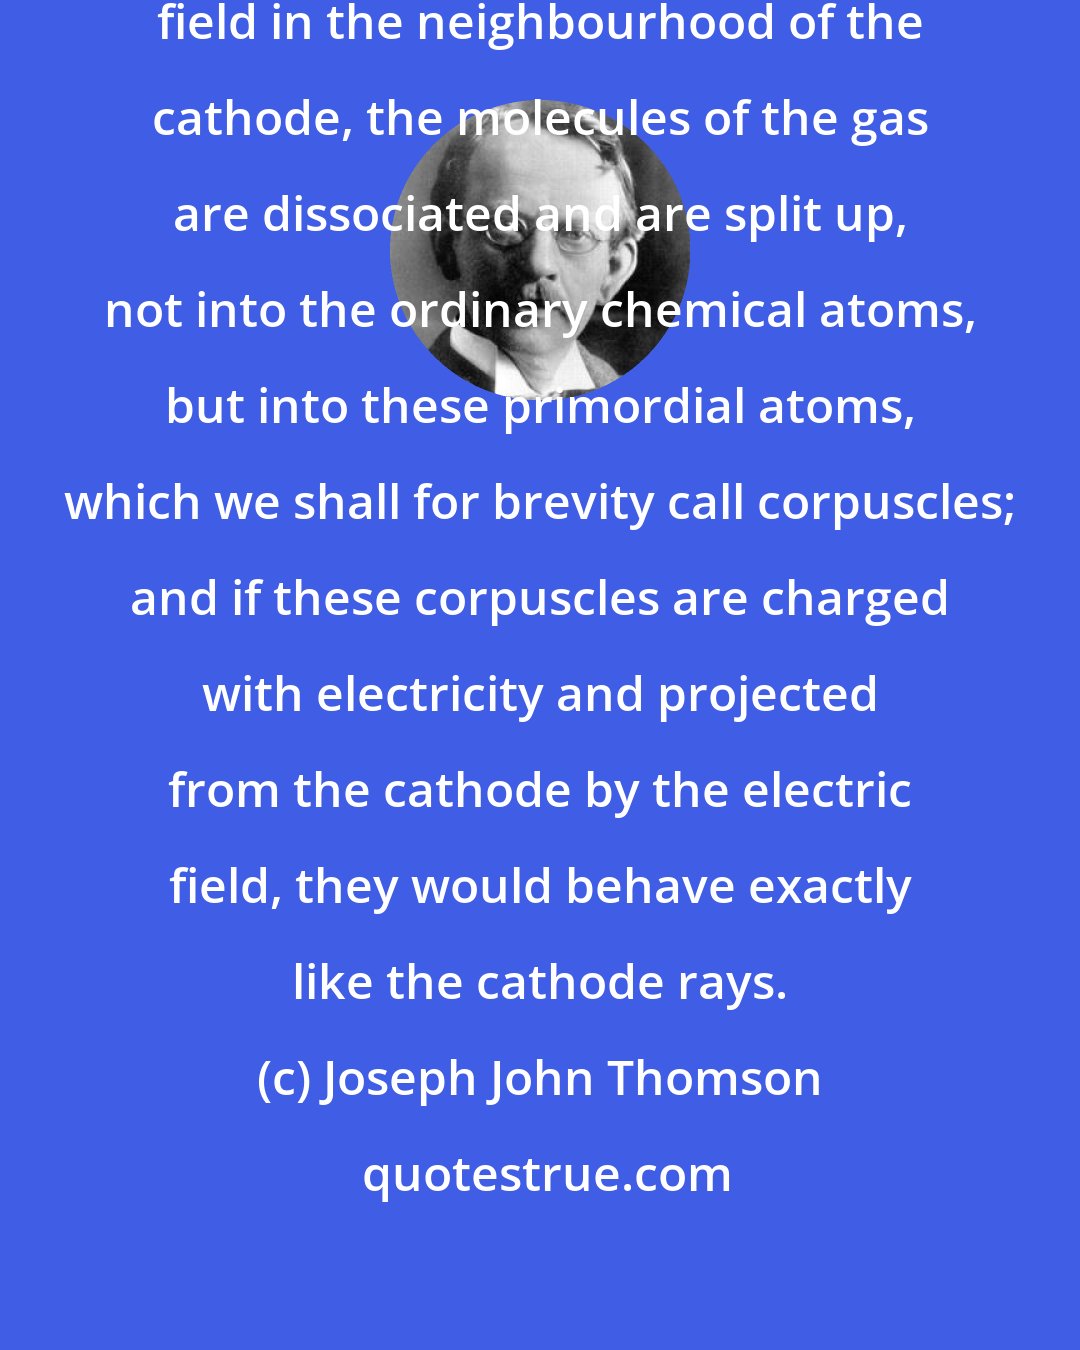 Joseph John Thomson: If, in the very intense electric field in the neighbourhood of the cathode, the molecules of the gas are dissociated and are split up, not into the ordinary chemical atoms, but into these primordial atoms, which we shall for brevity call corpuscles; and if these corpuscles are charged with electricity and projected from the cathode by the electric field, they would behave exactly like the cathode rays.